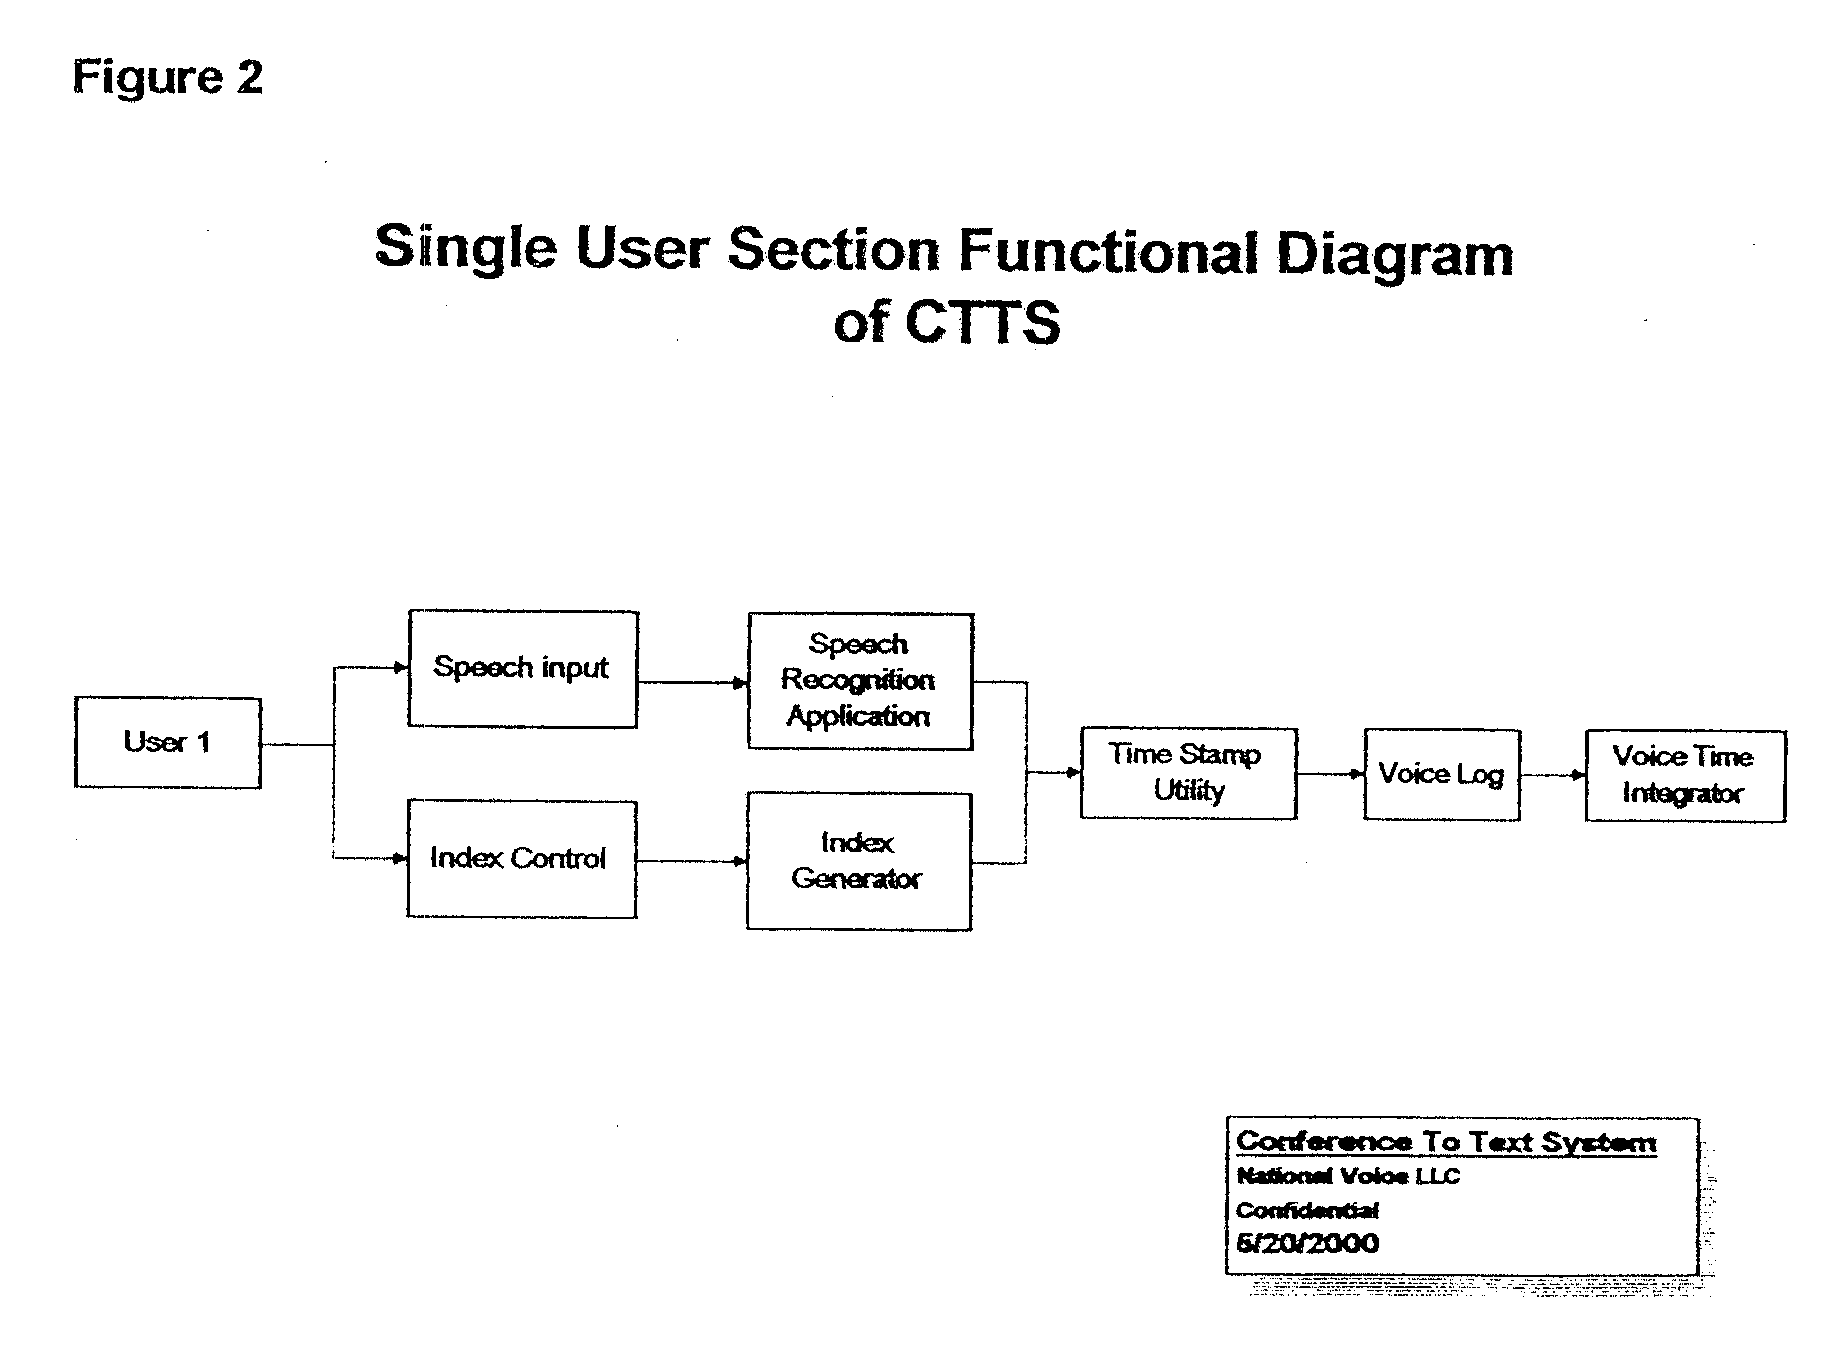 Simultaneous multi-user real-time voice recognition system